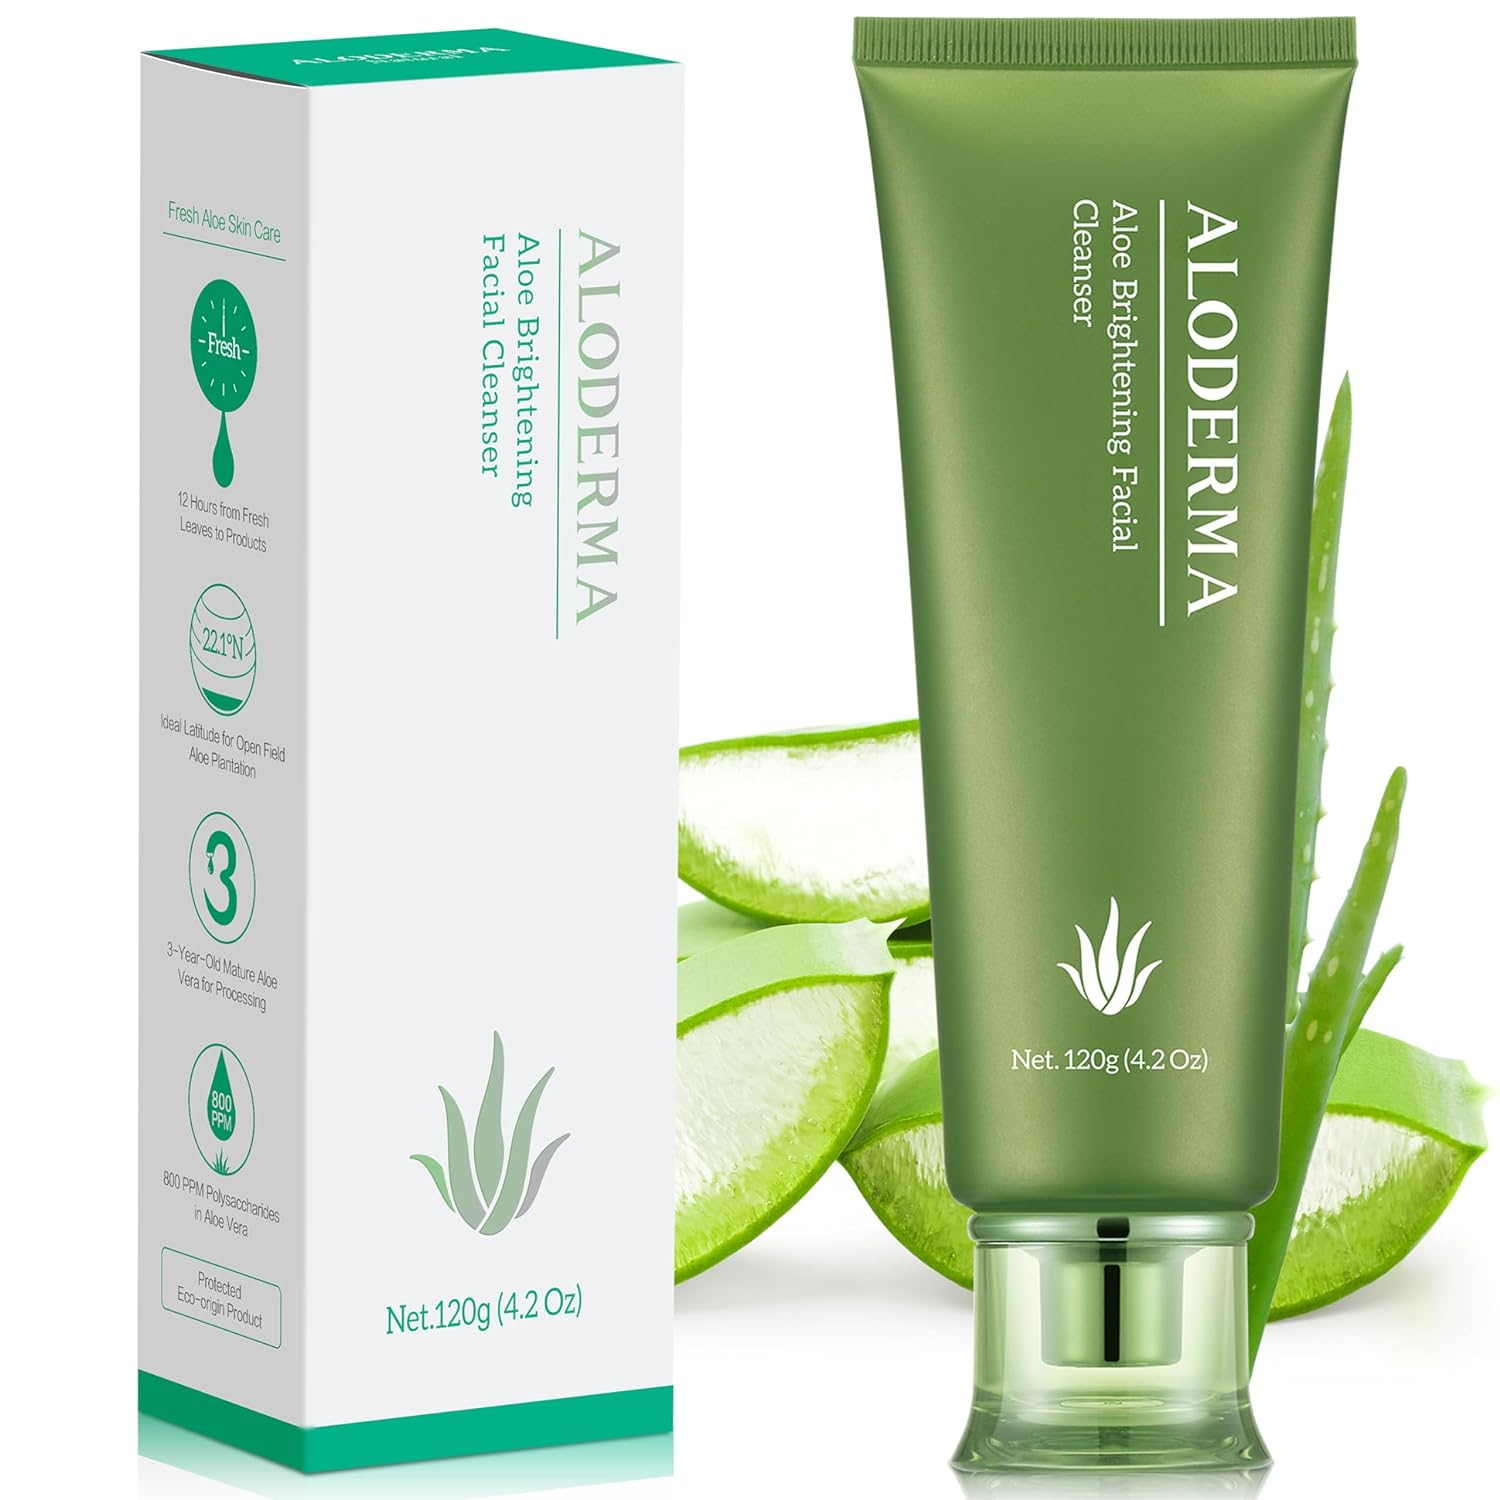 Aloderma Skin Brightening Face Cleanser Made with 77% Organic Aloe Vera - Natural Brightening Daily Face Wash with Licorice for Radiant Skin - Gentle, Nourshing Formulf for Everyday Use, 4.2oz